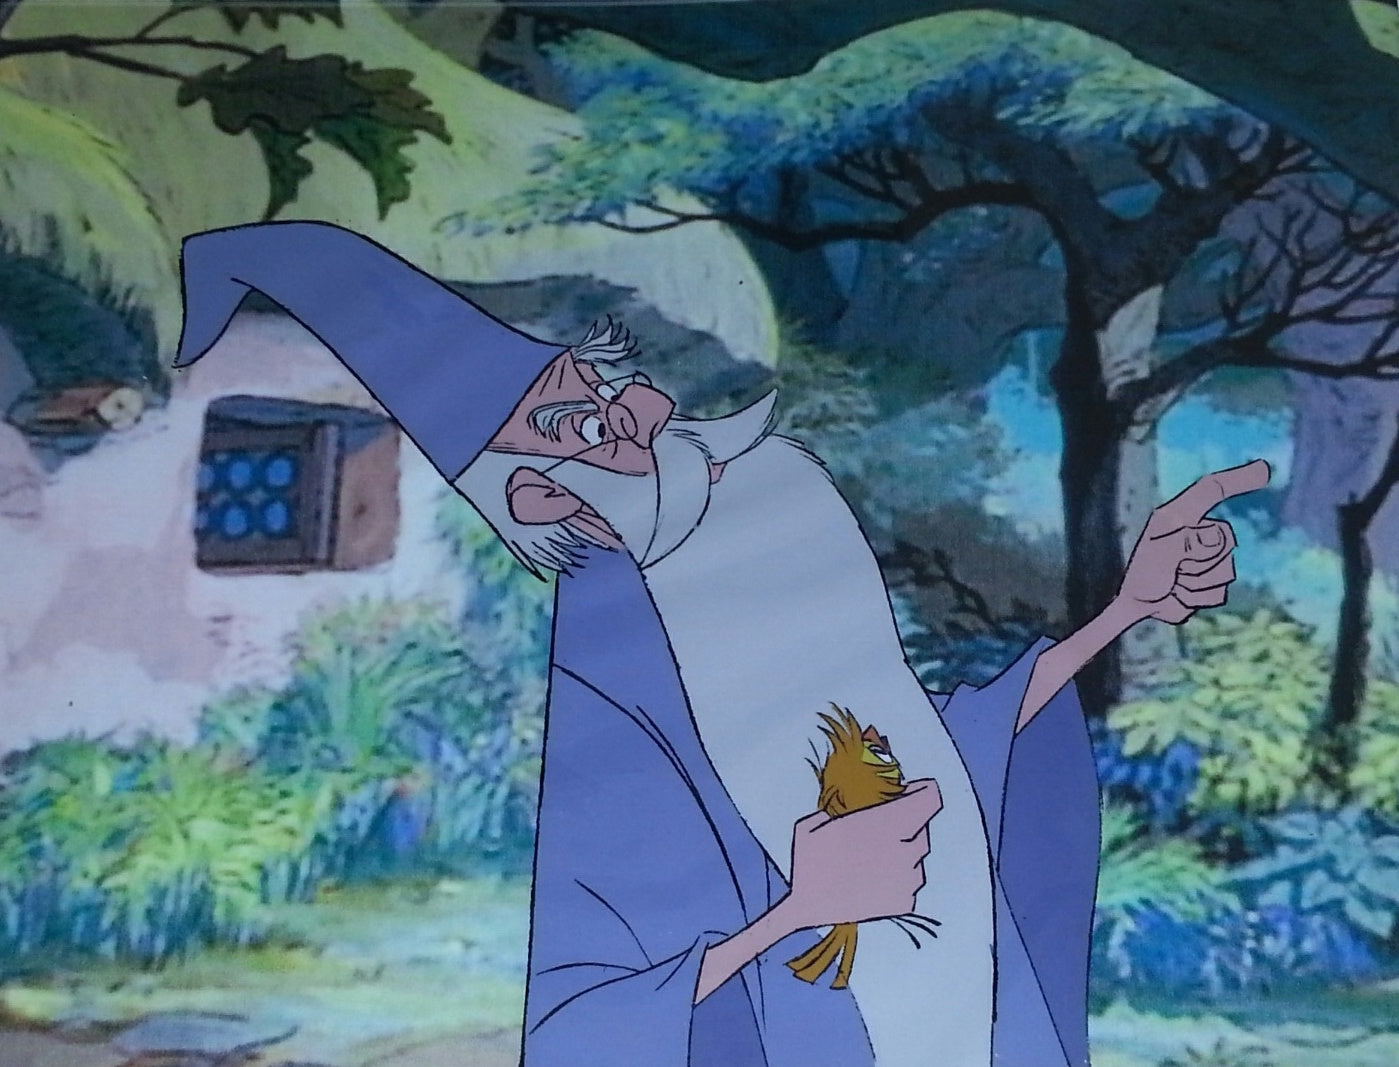 Original Walt Disney Production Cel from The Sword in the Stone featuring Merlin and Arthur as a bird